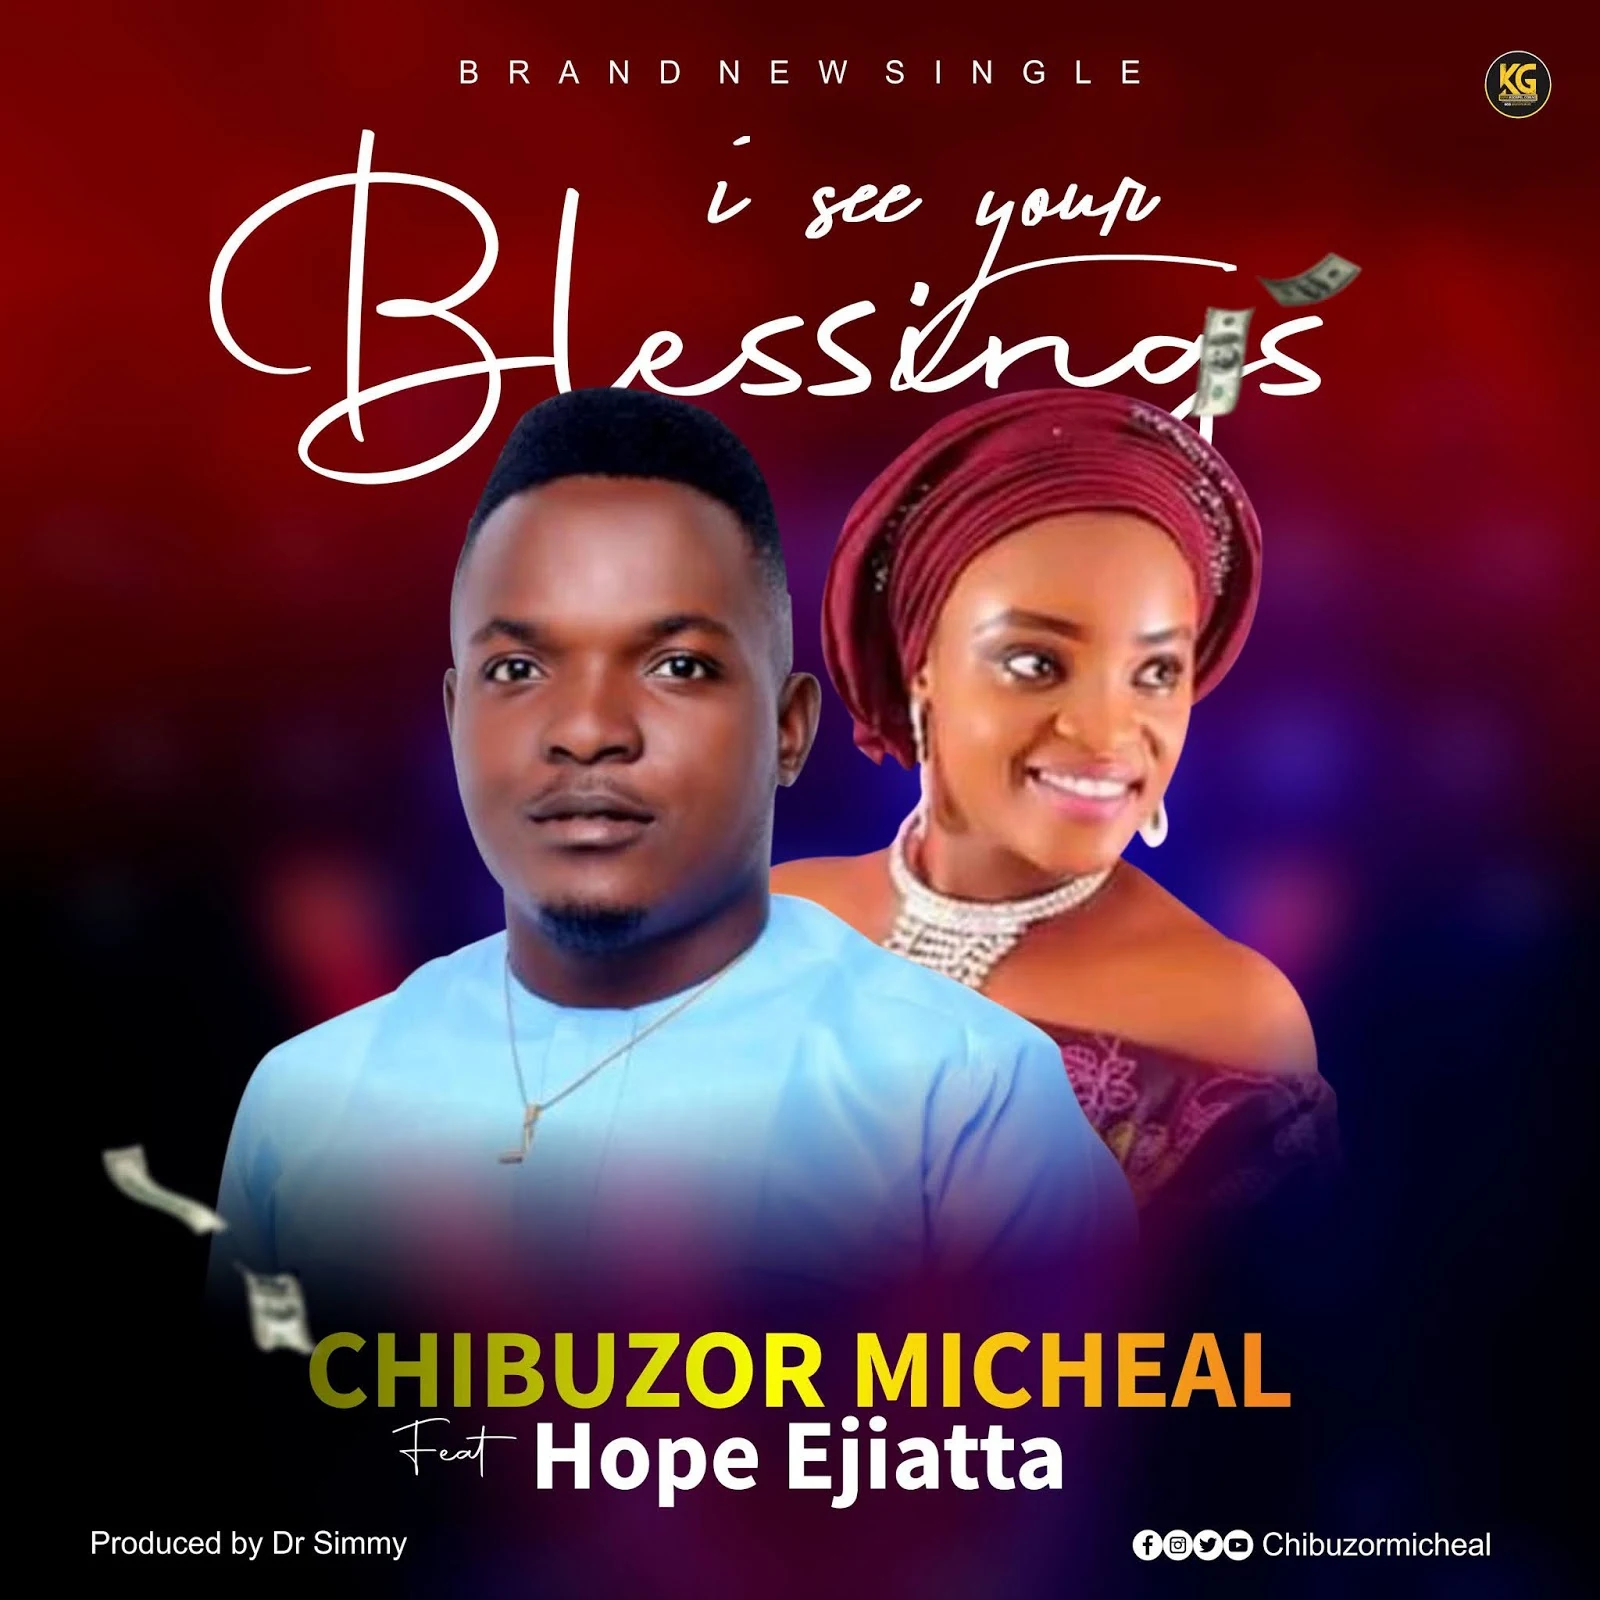  I See Your Blessings - Chibuzor Micheal Feat Hope Ejiatta